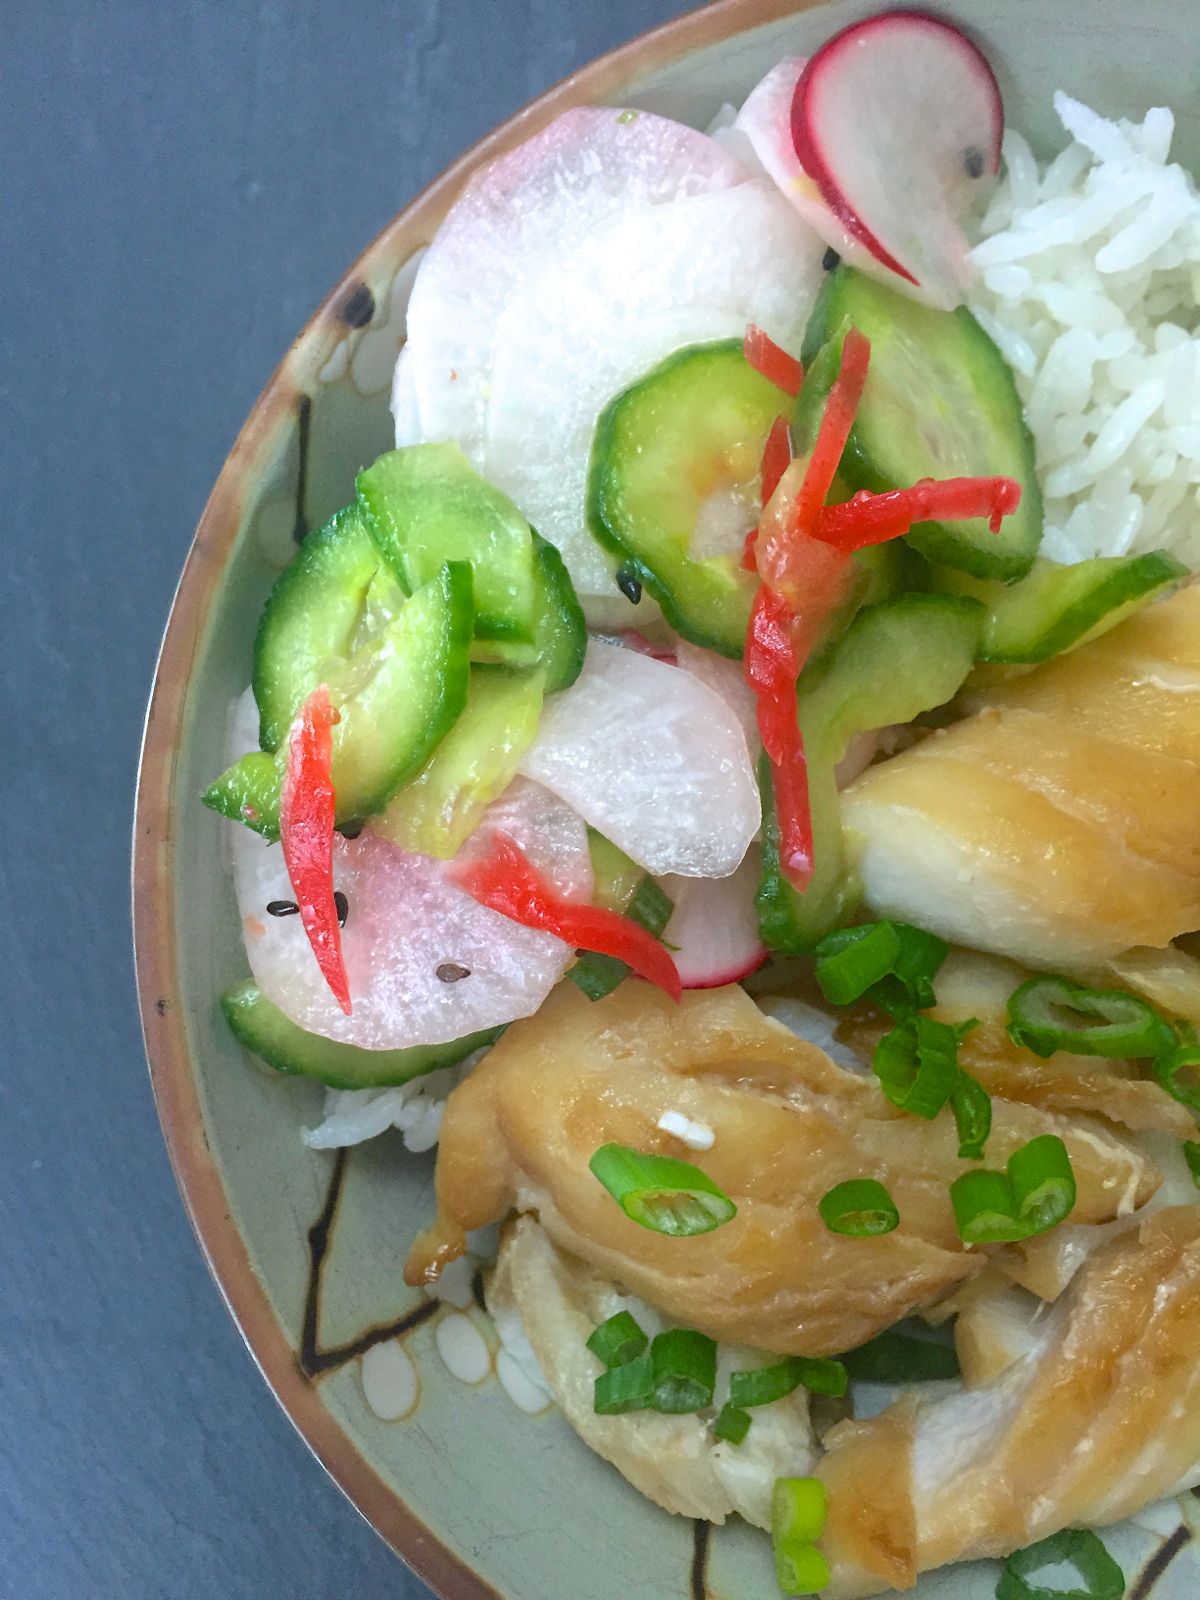 baked teriyaki fish with pickled vegetables :: by radish*rose